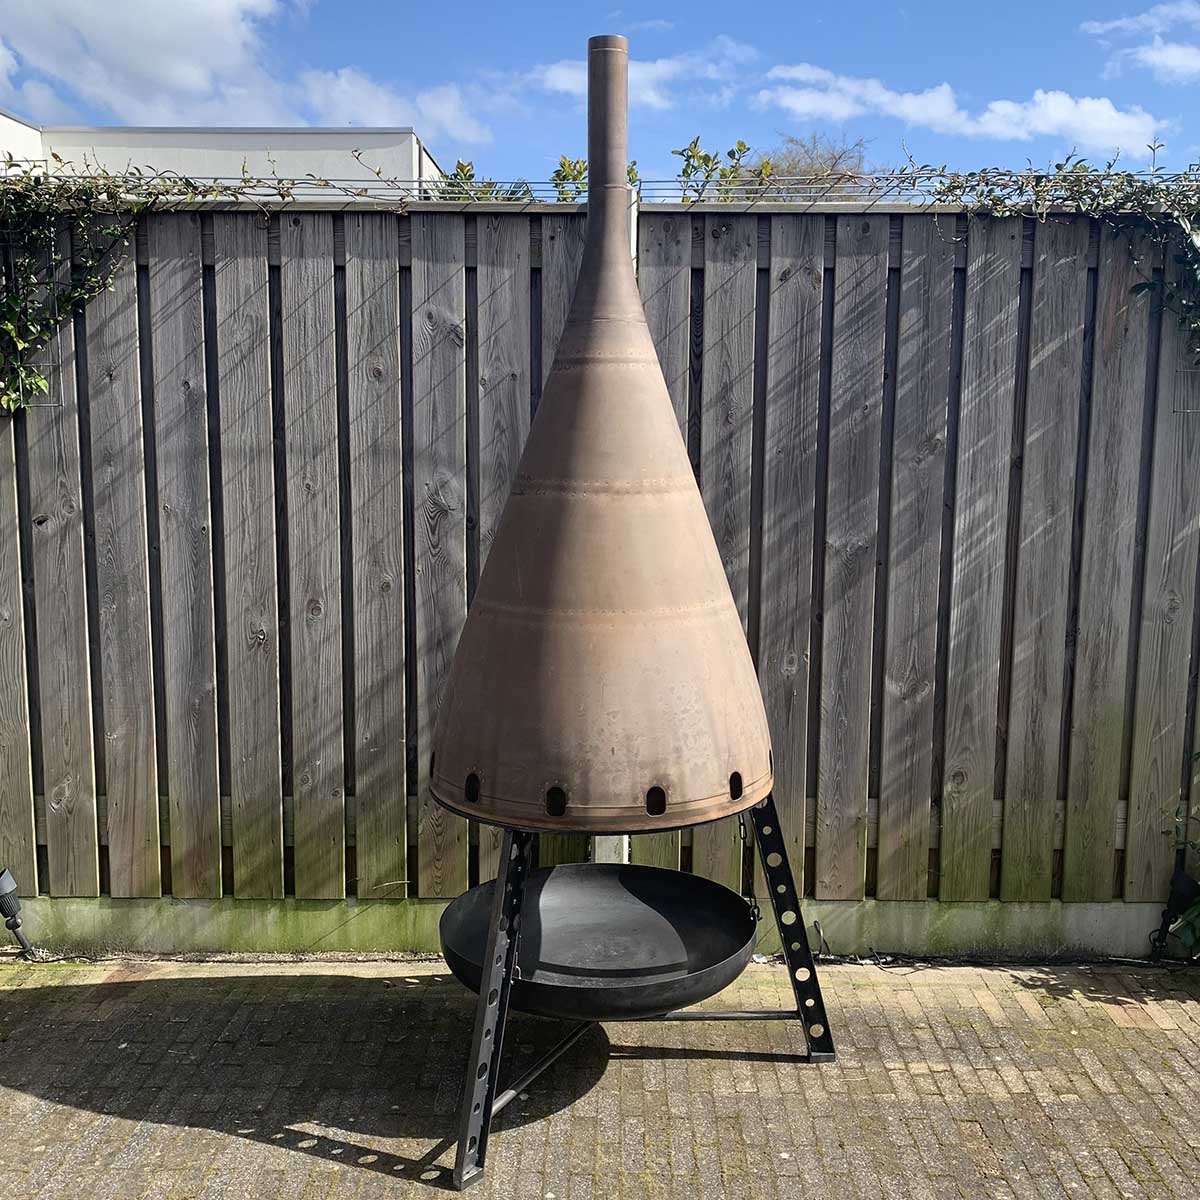 Large outdoor fireplace that was made using the exhaust cone of a Boeing 747 engine.